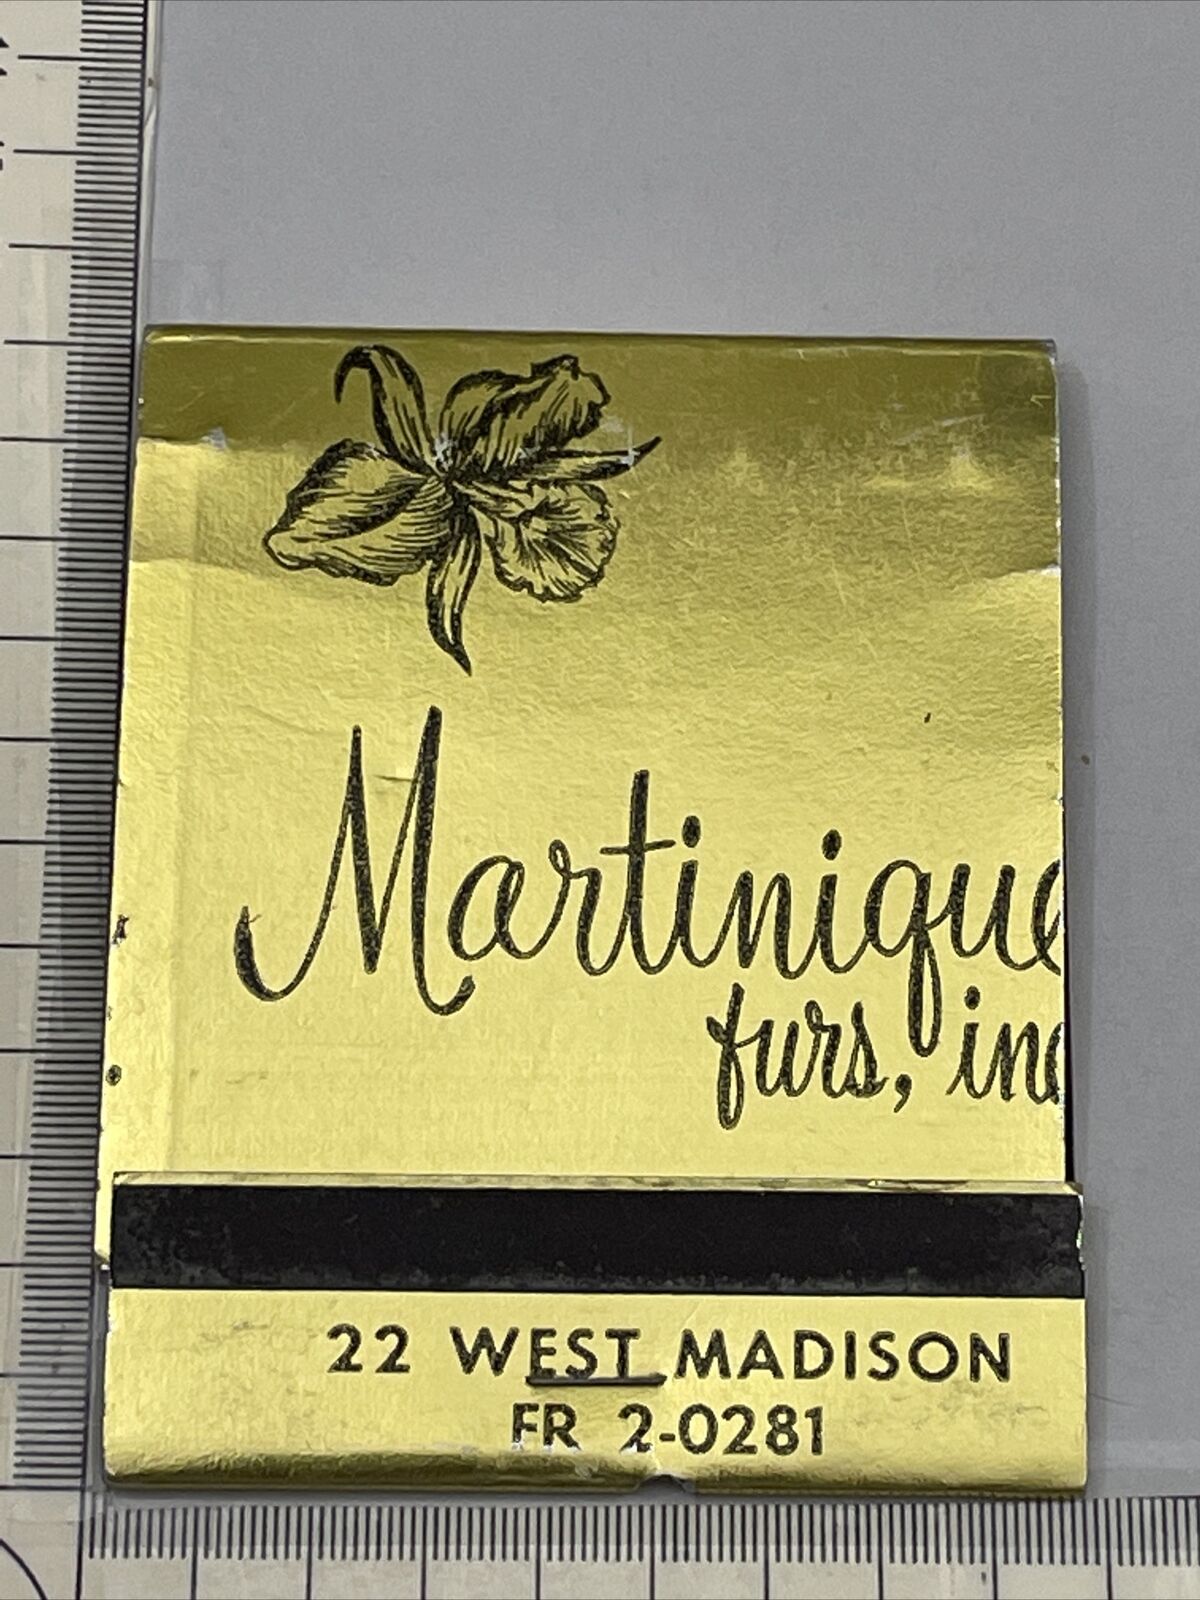 Rare Giant Matchbook Cover  Martinique Furs, Inc  gmg  Unstruck